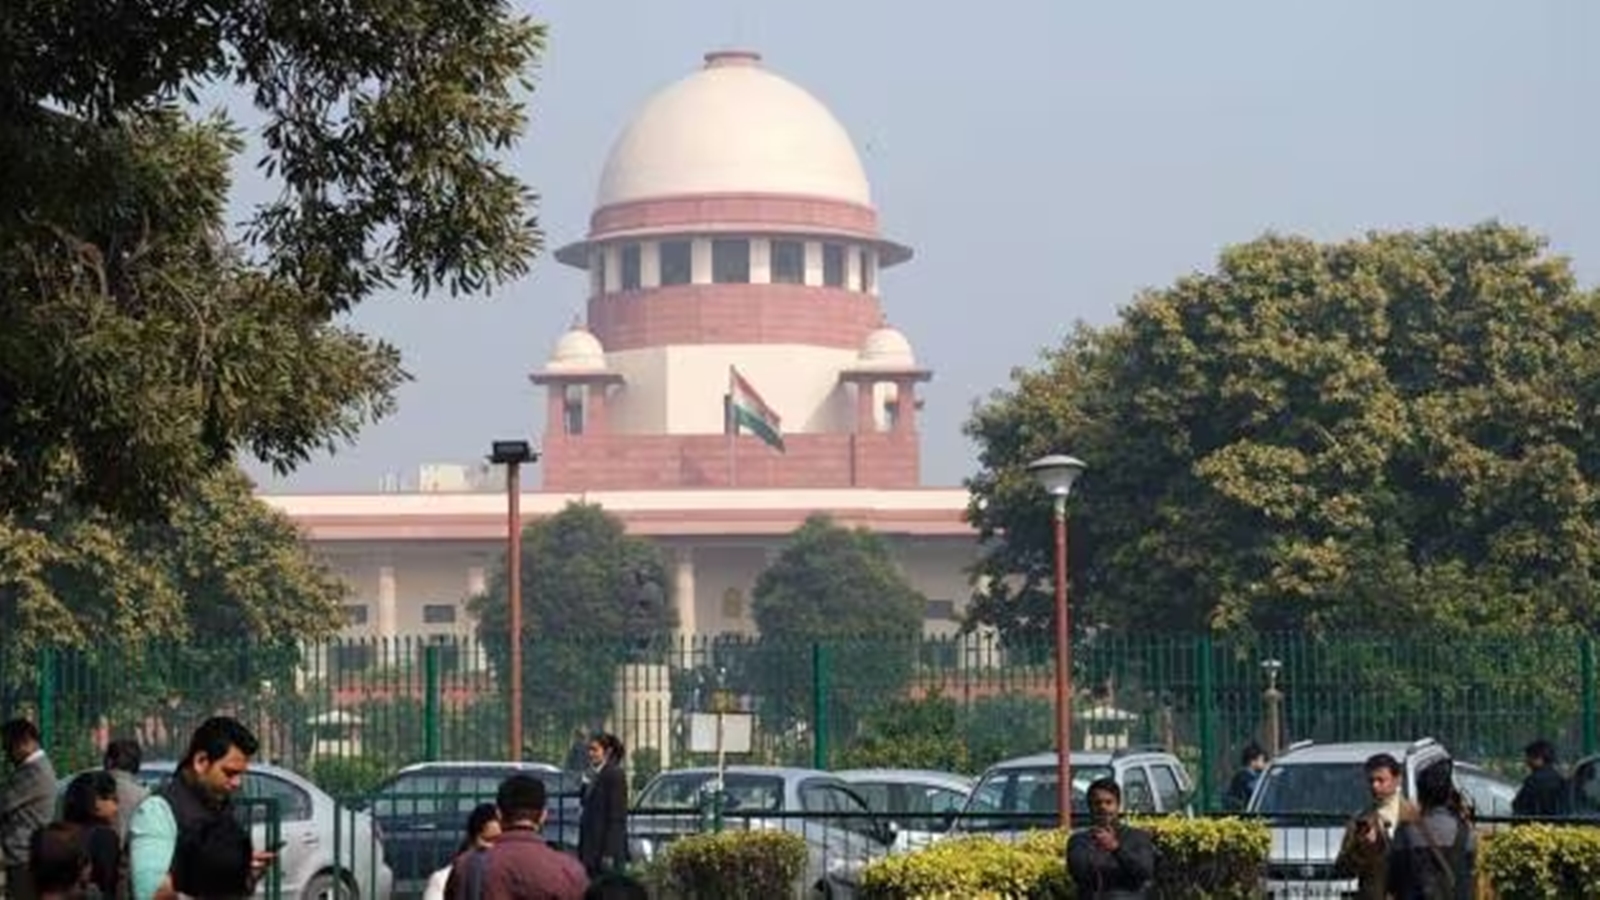 android, sc bar association writes to cji requesting ‘no adverse order be passed’ today